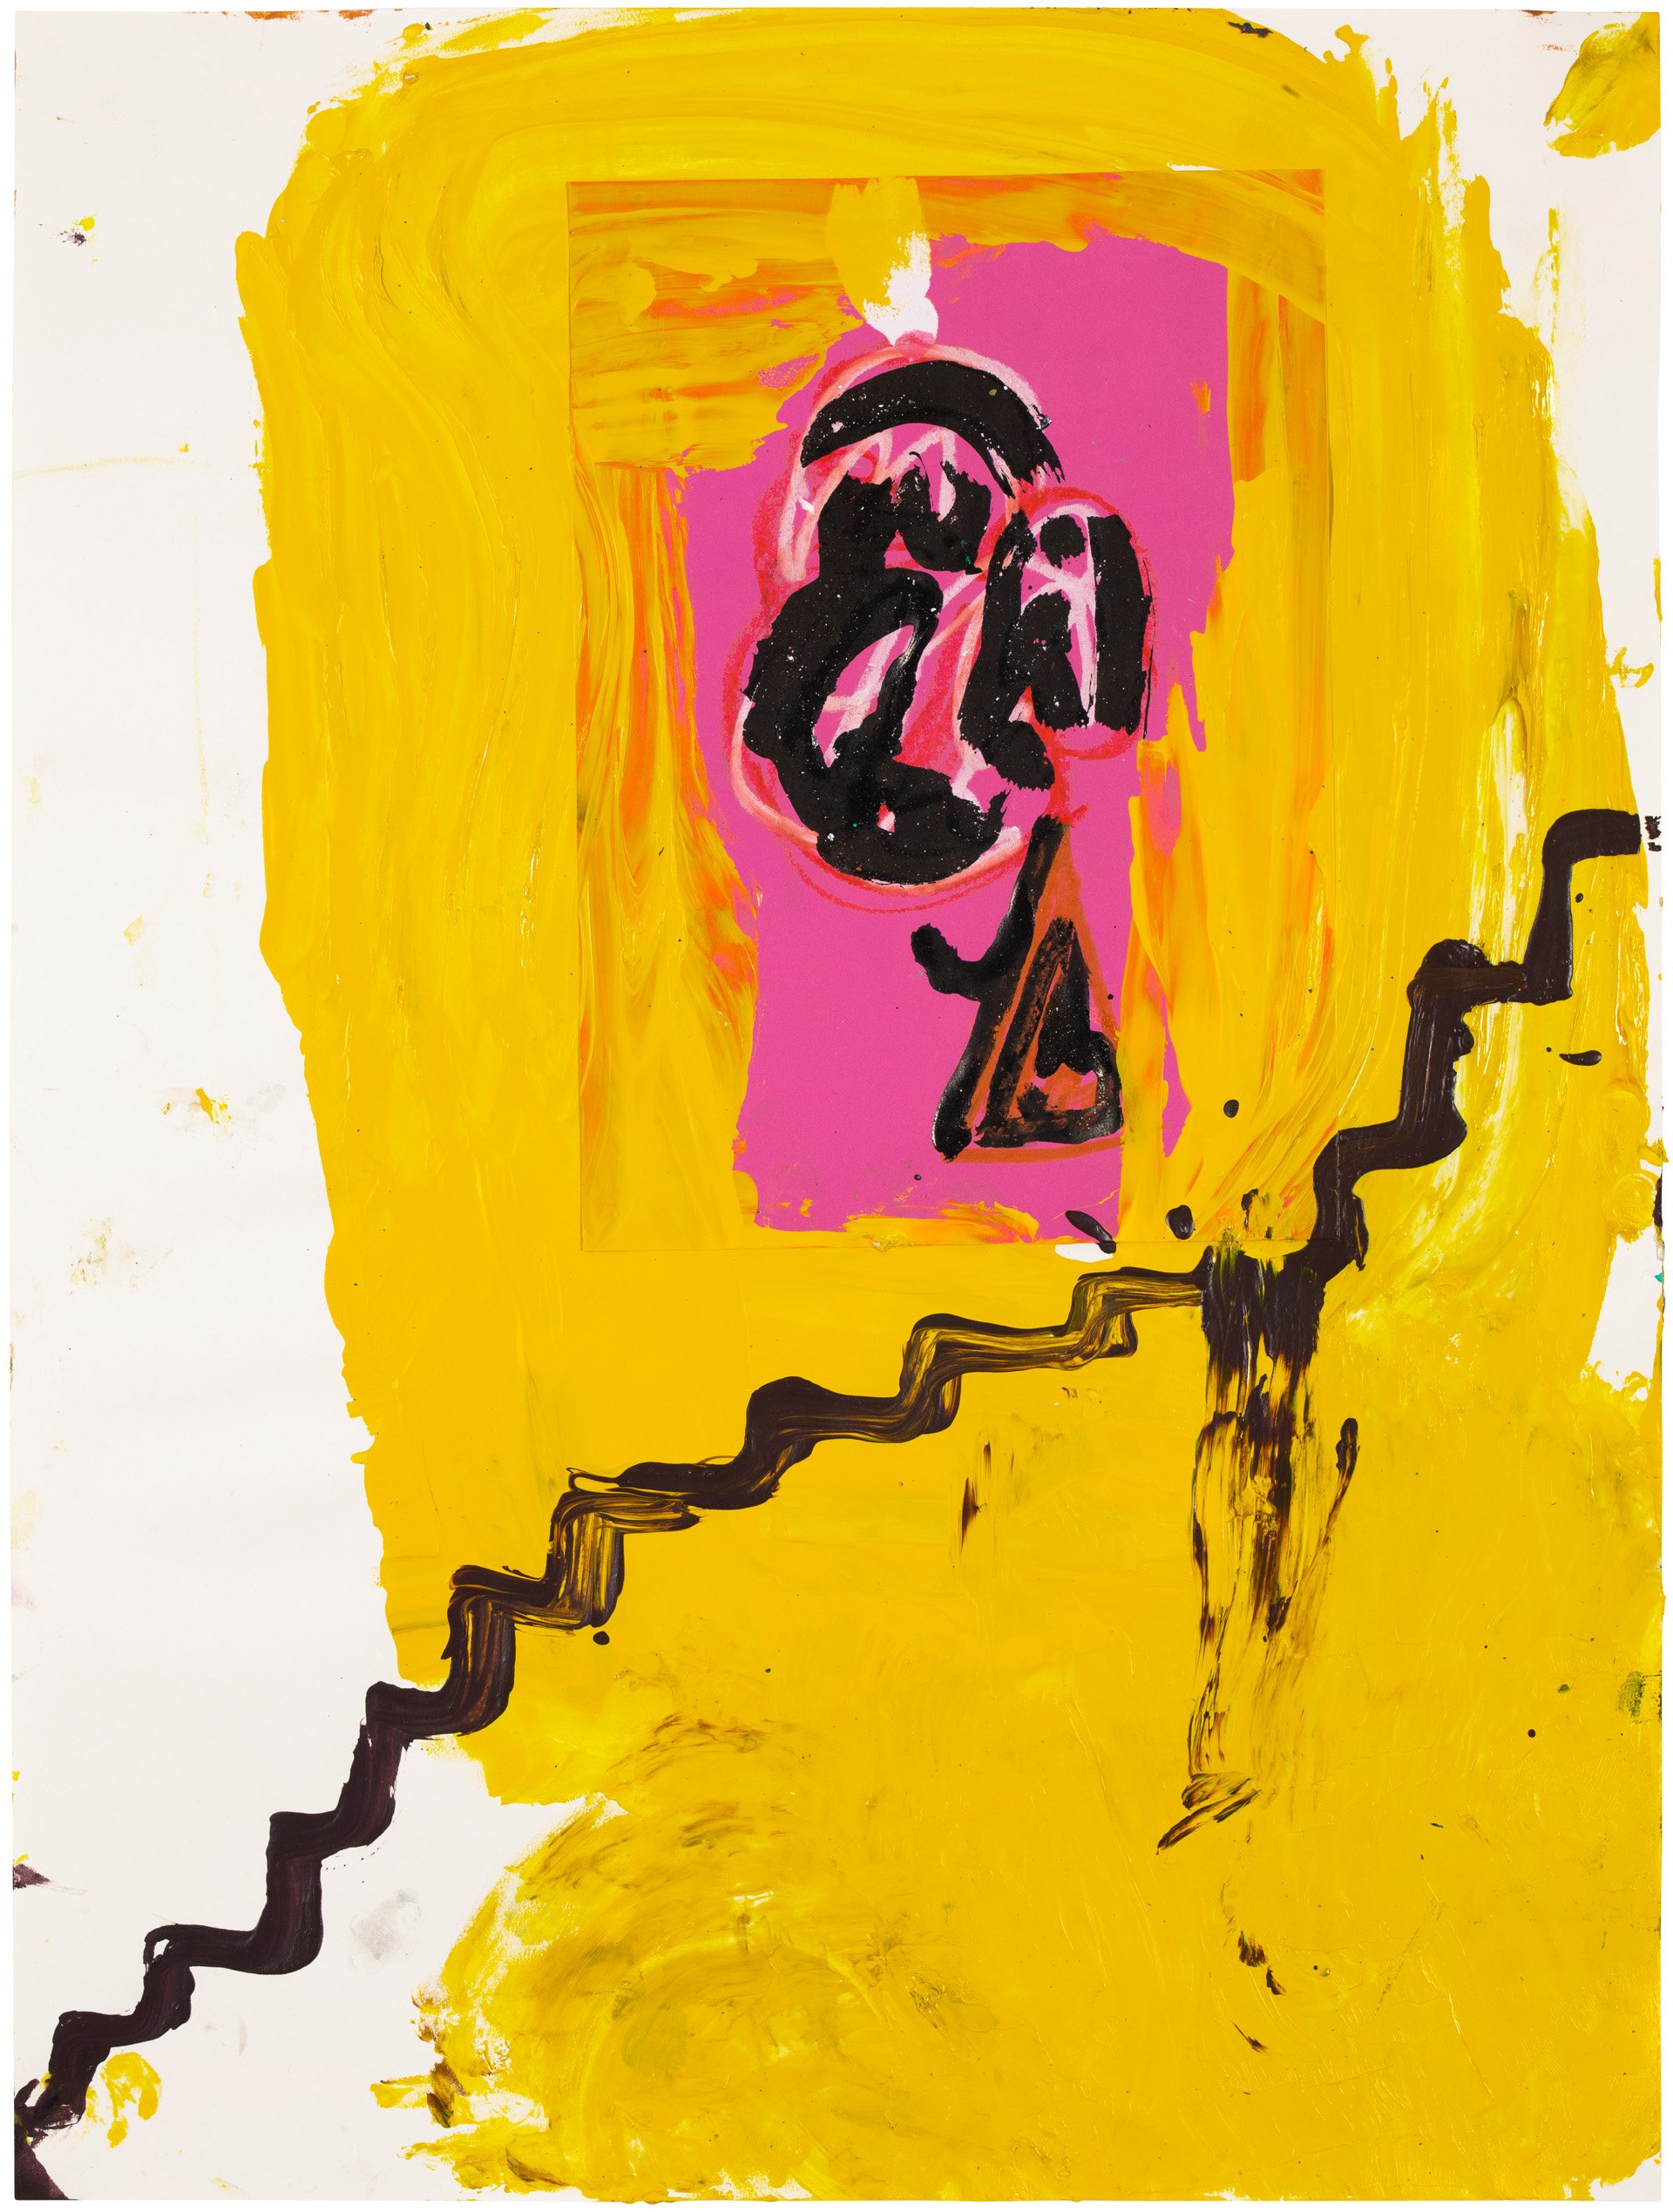  Drew Beattie and Ben Shepard DBBS-DRW-2021-117 2021 acrylic and collage on paper 24 x 18 inches 